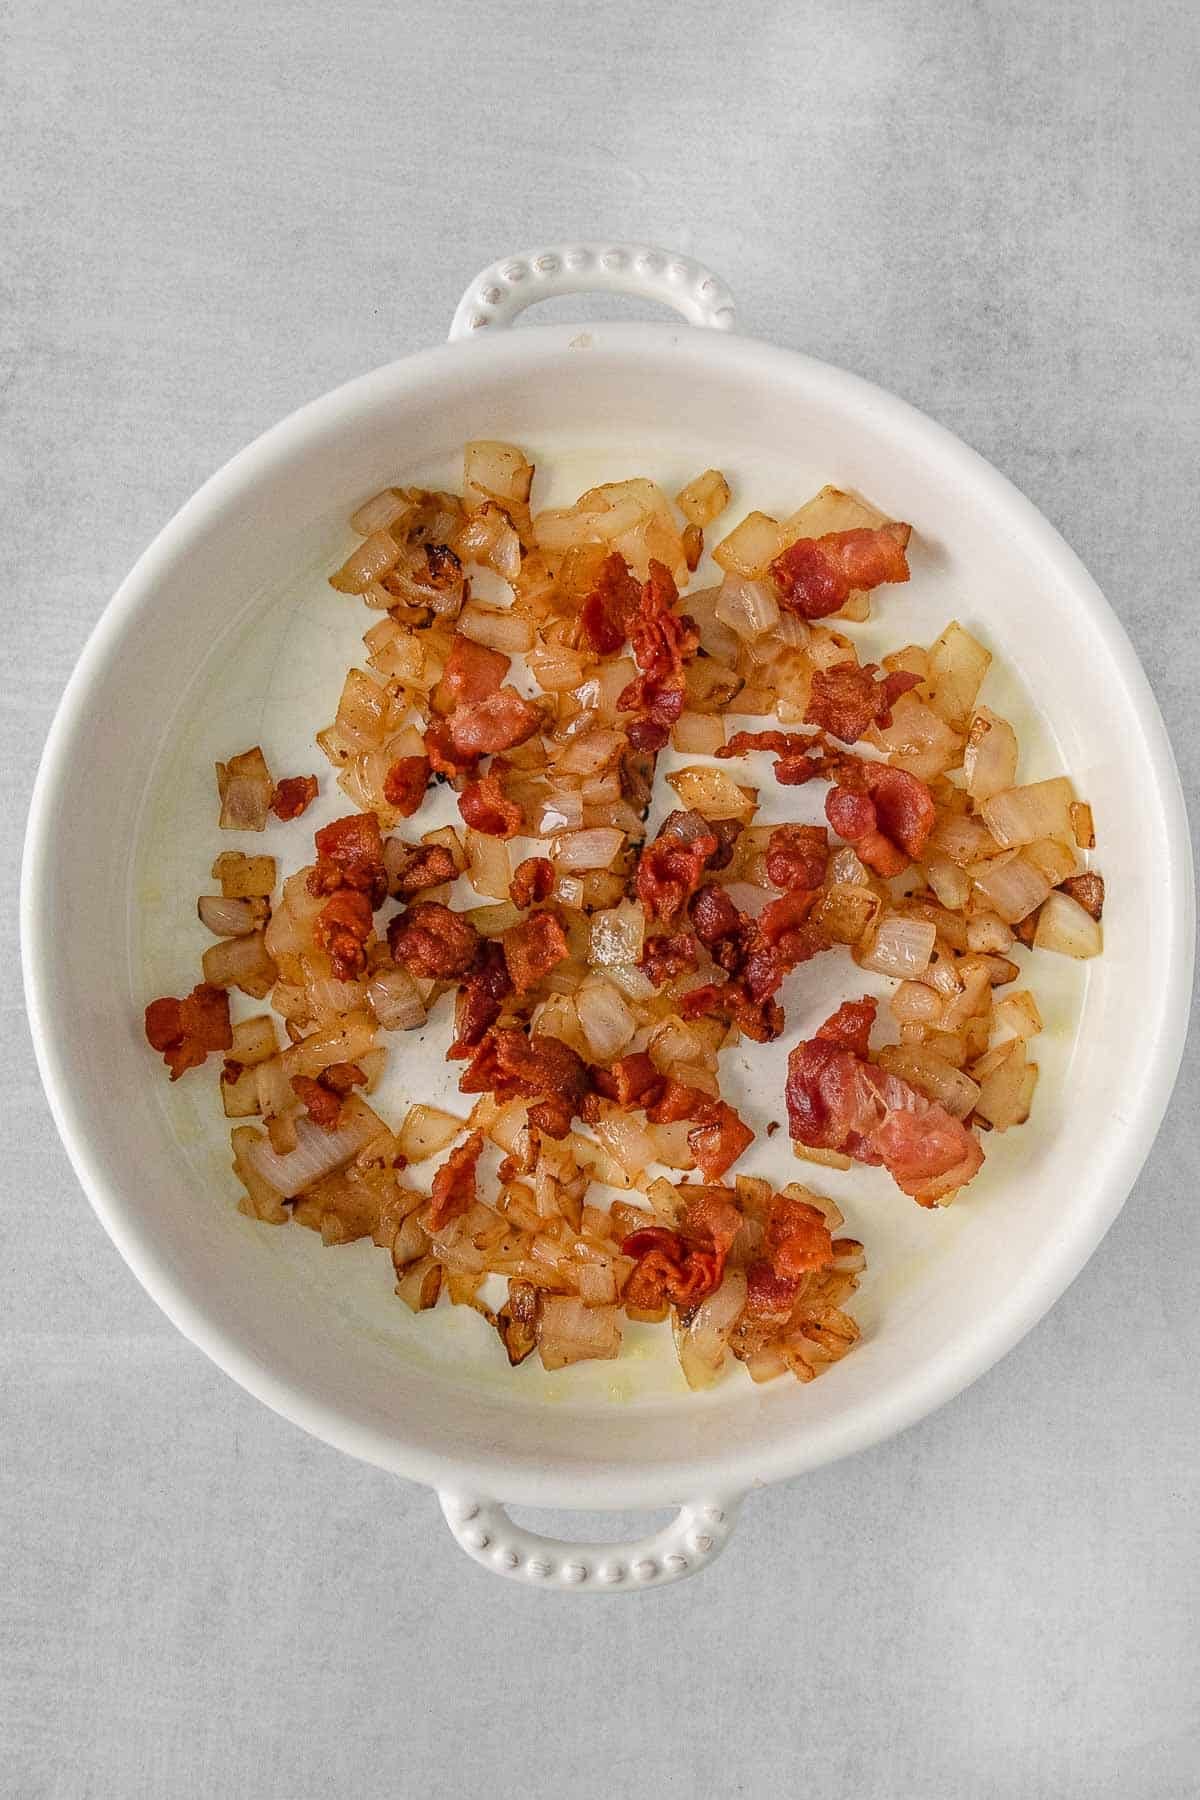 White bowl containing cooked bacon and onion mixed together.